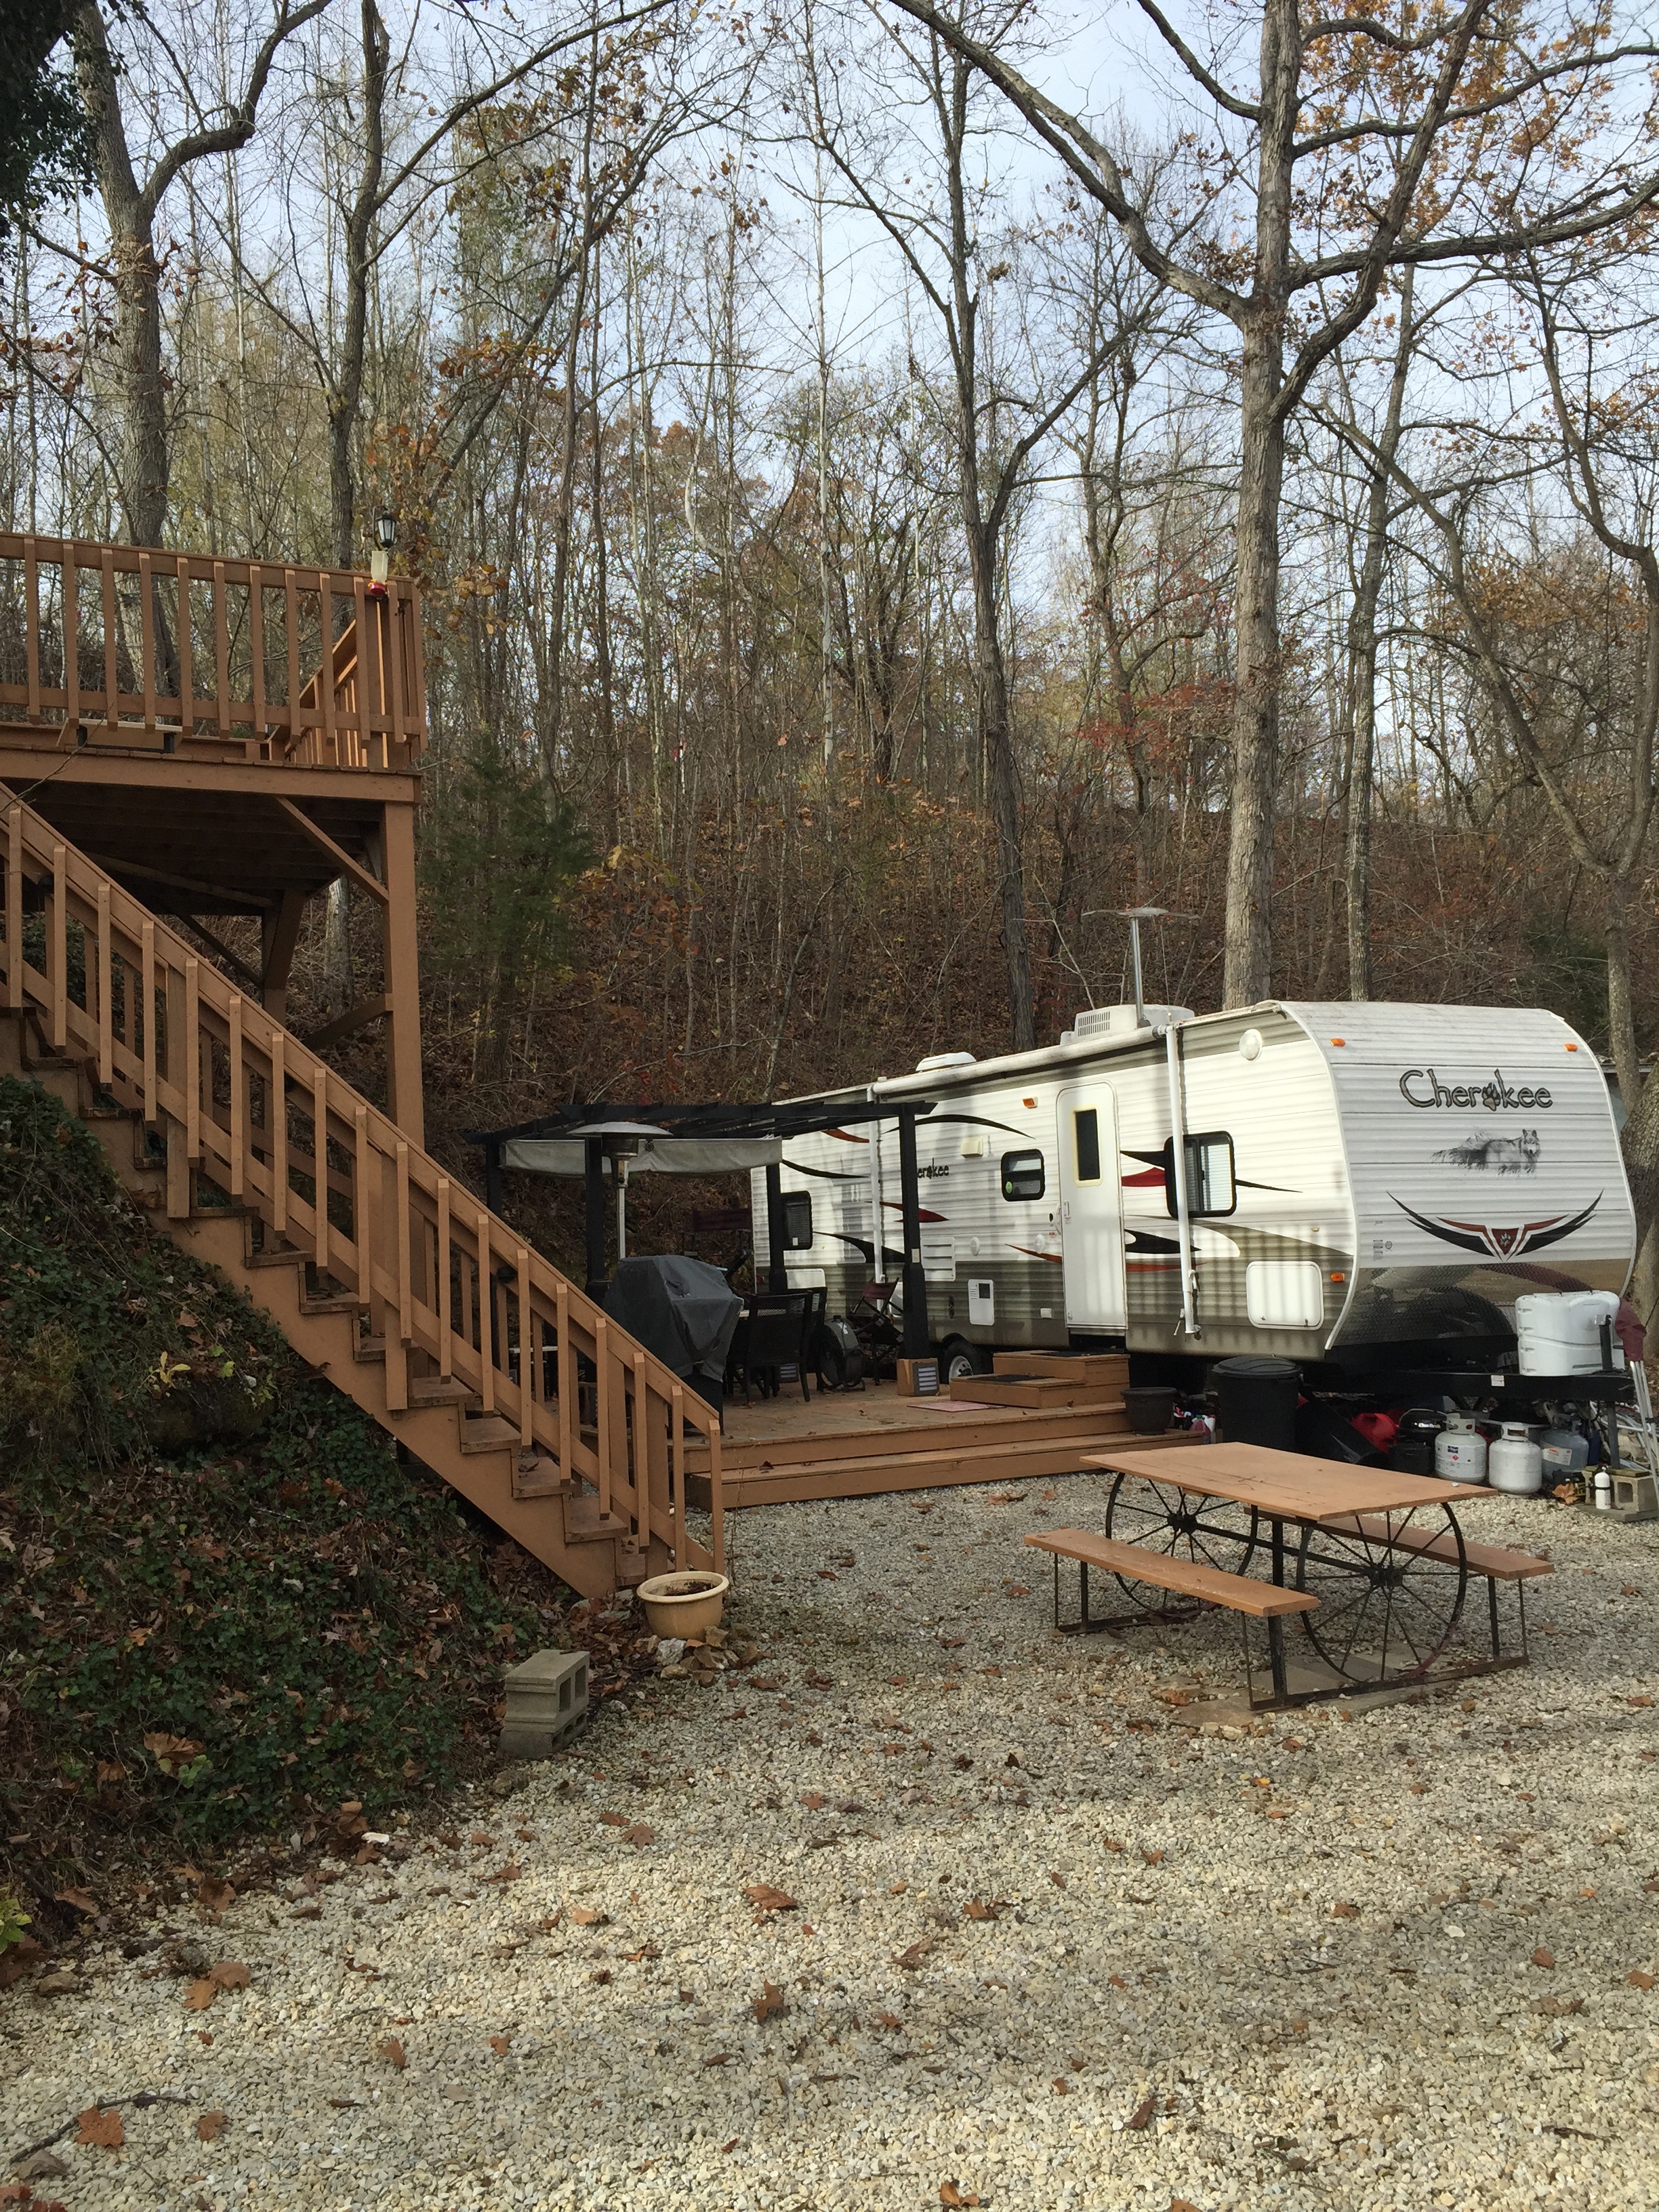 Camper and Lot located at Morelands Gasconade River Resort on Maries County Road 325 in Vienna, 65582